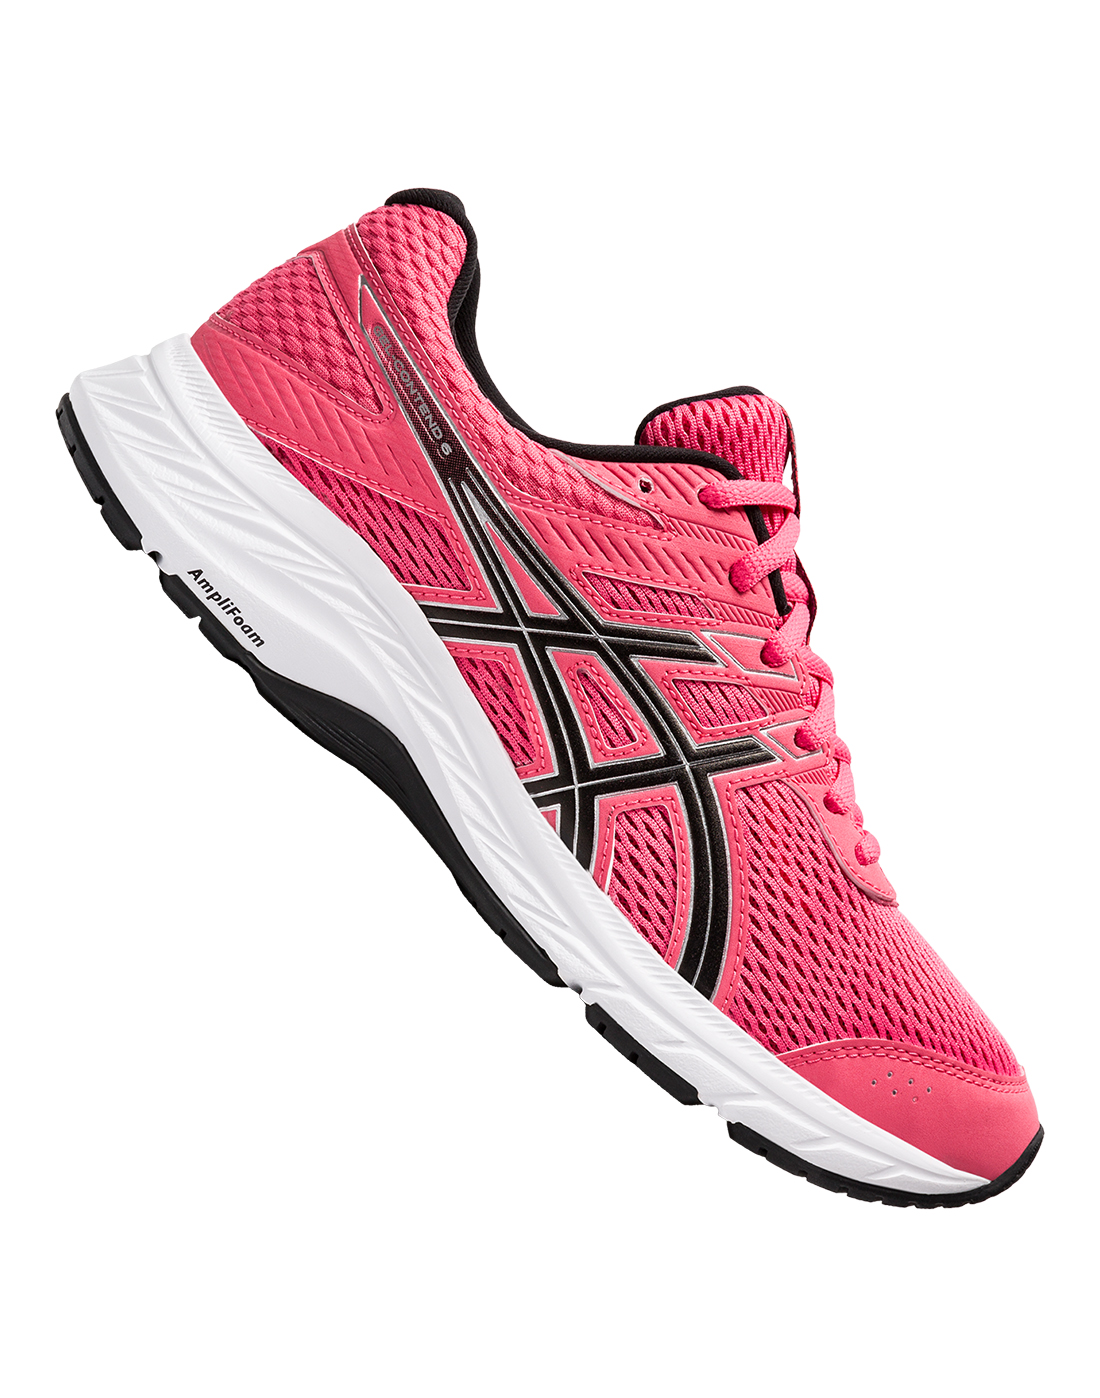 Asics Womens Gel Contend 6 - Pink | Life Style Sports IE